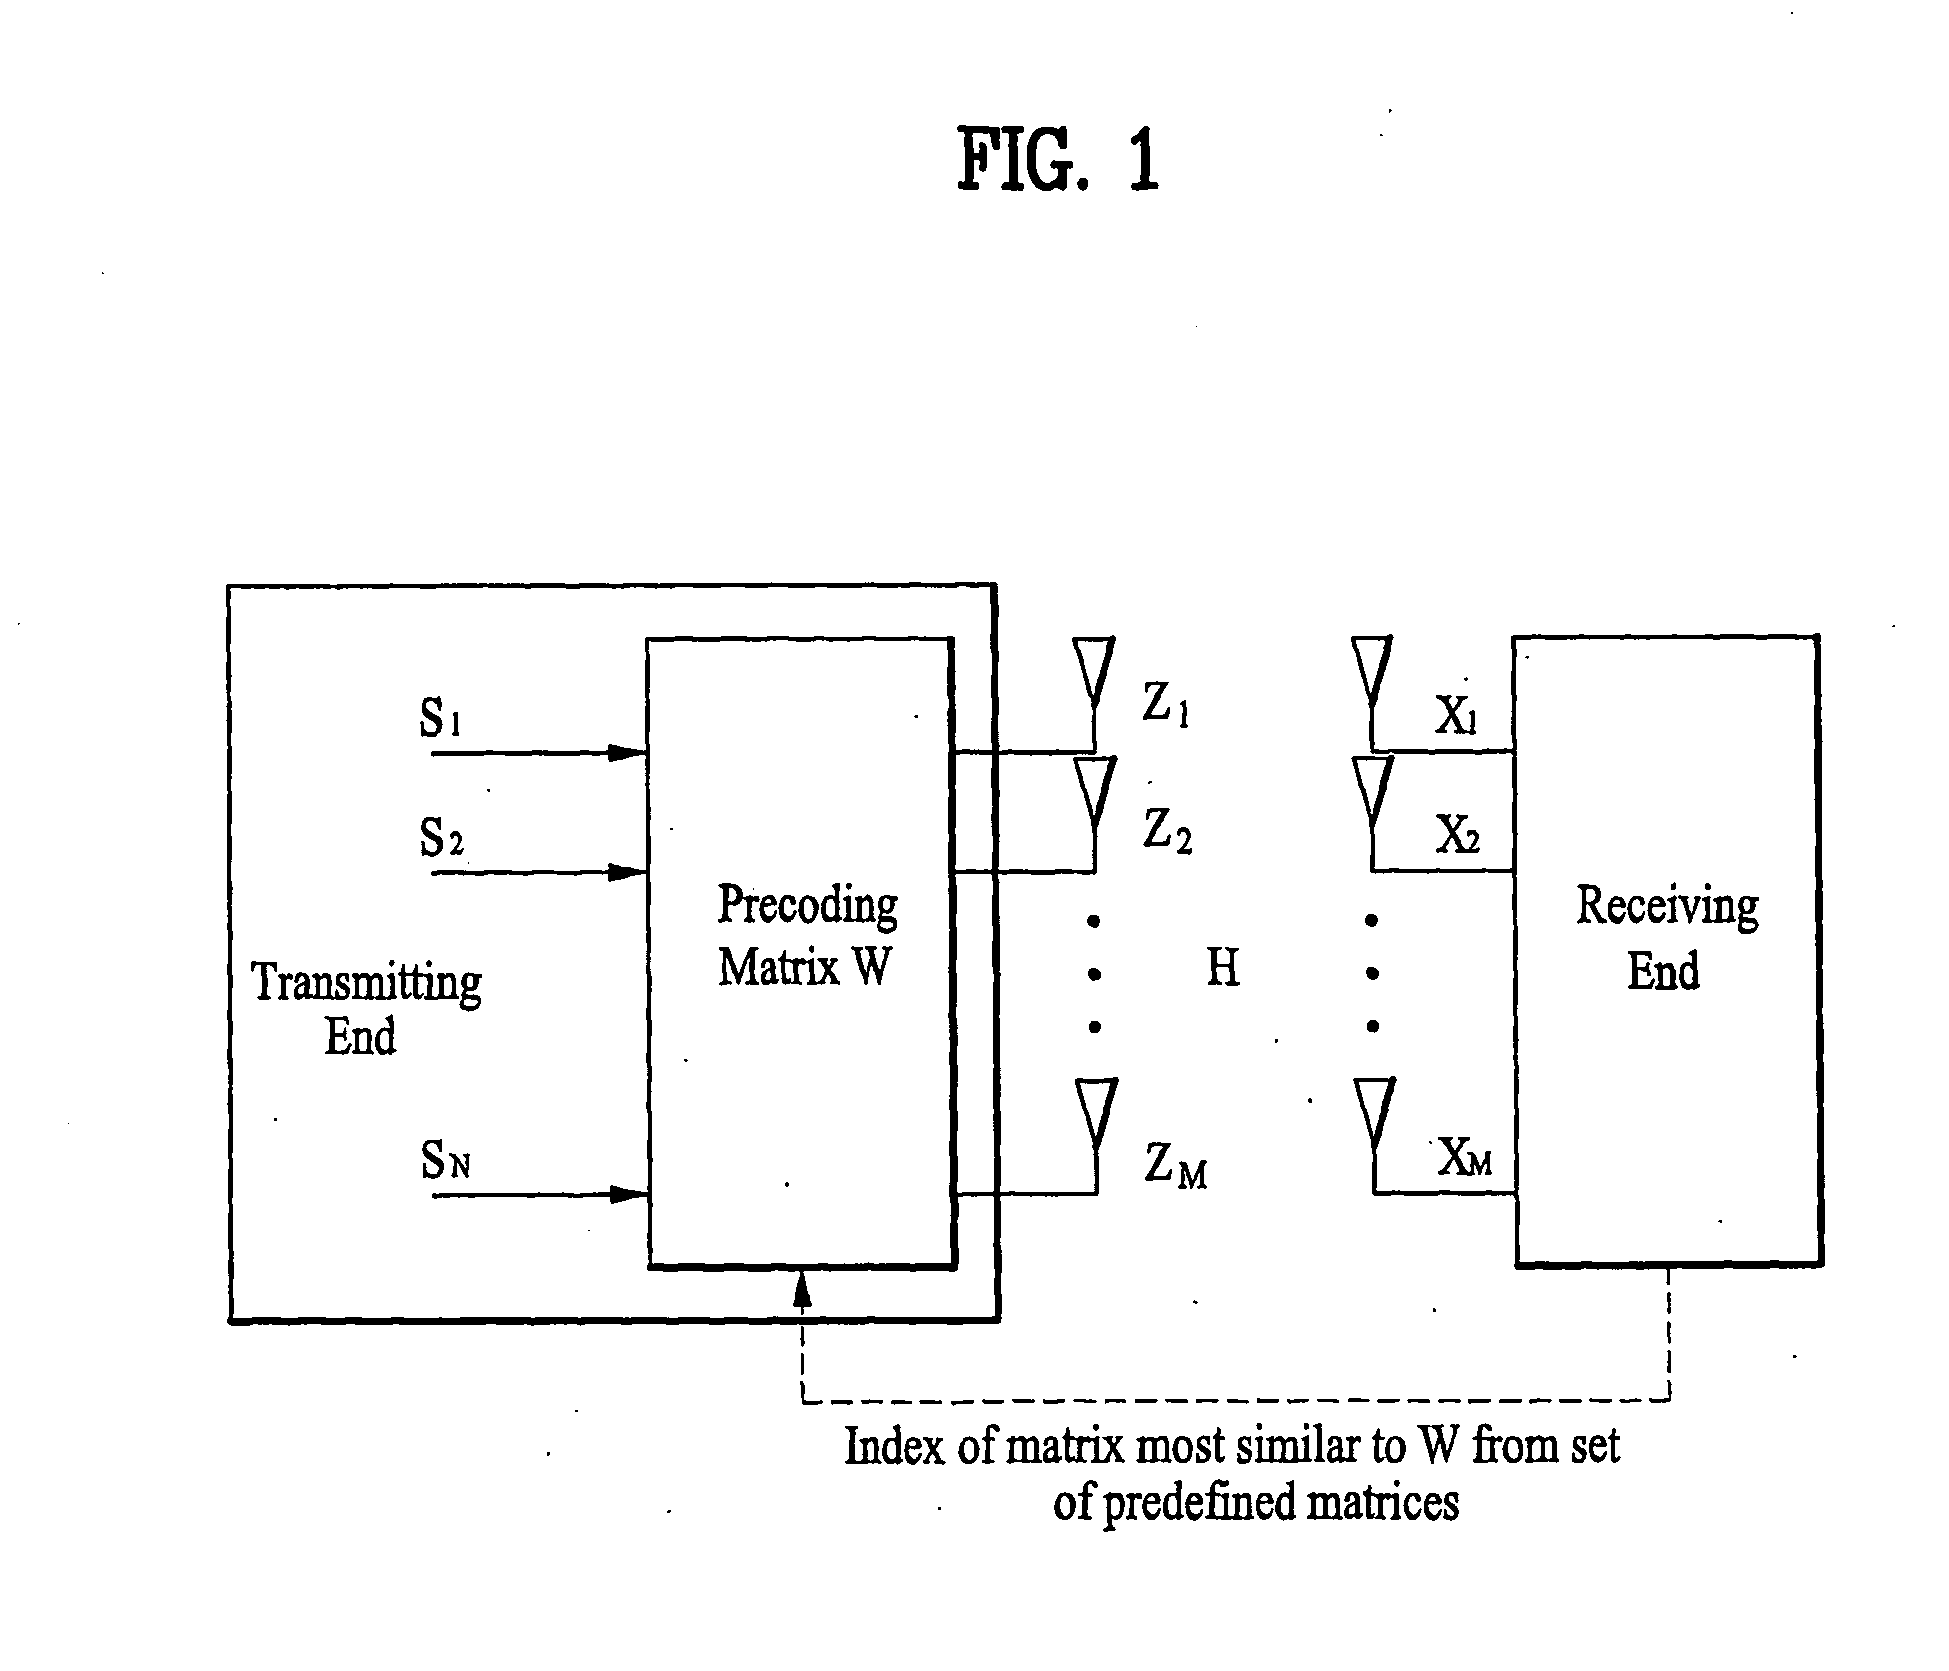 Method of transmitting a precoding matrix in a multi-input multi-output (MIMO) system